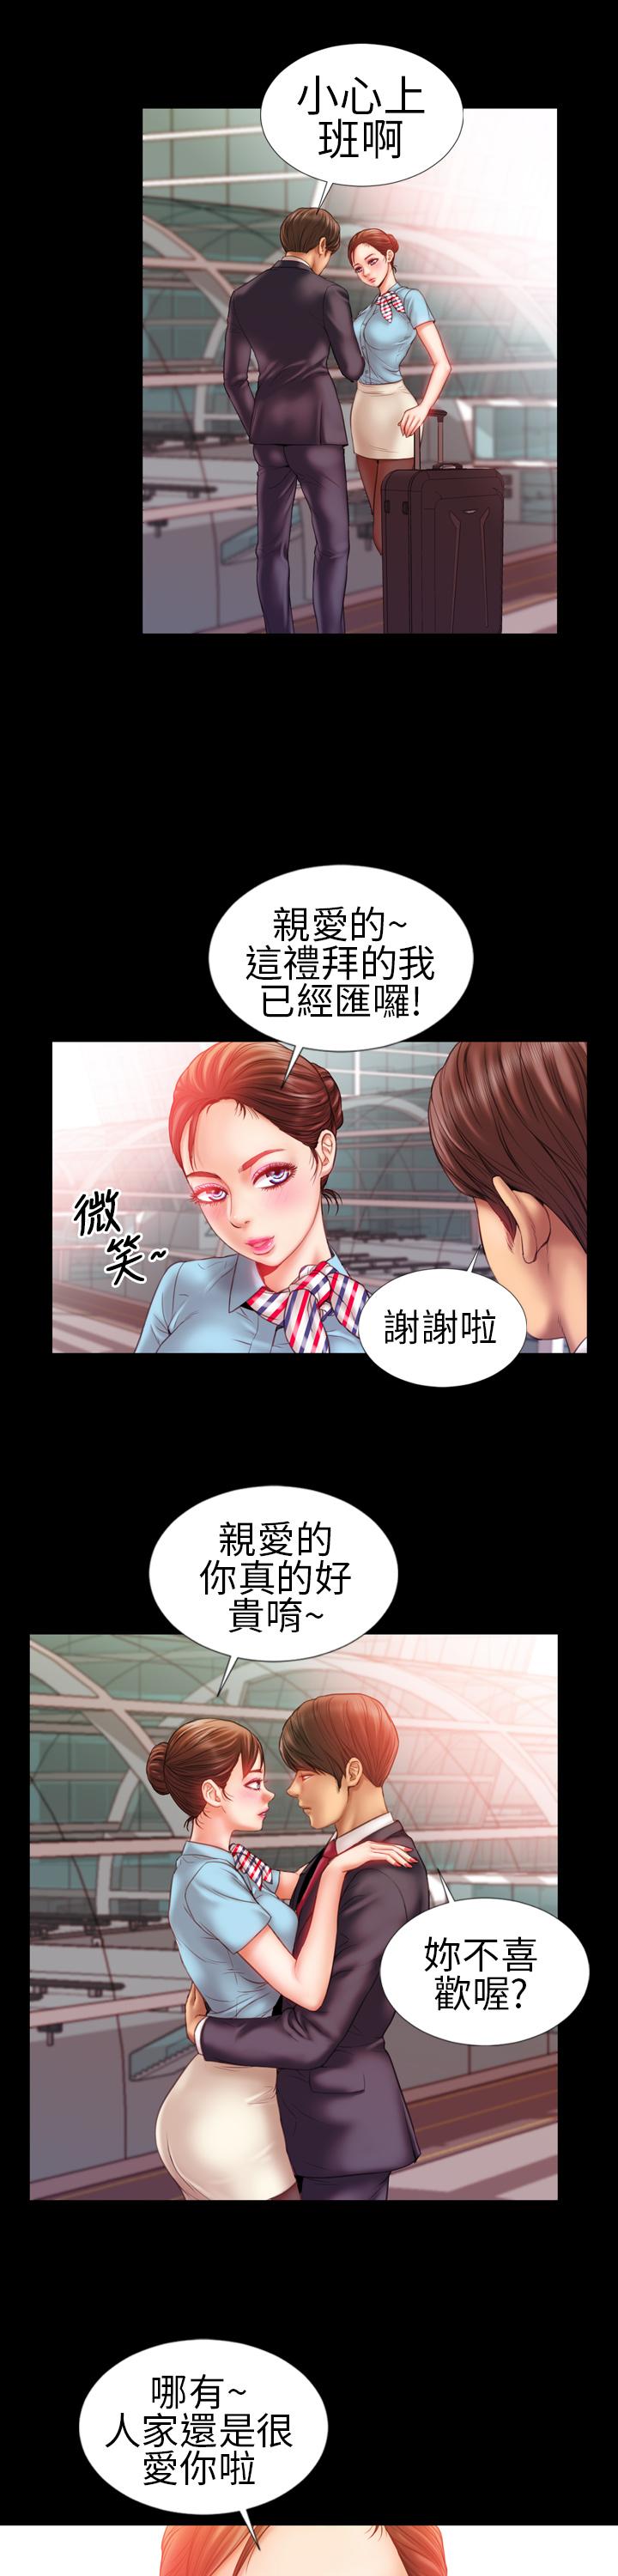 MY WIVES (淫蕩的妻子們) Ch.1 (Chinese) 16